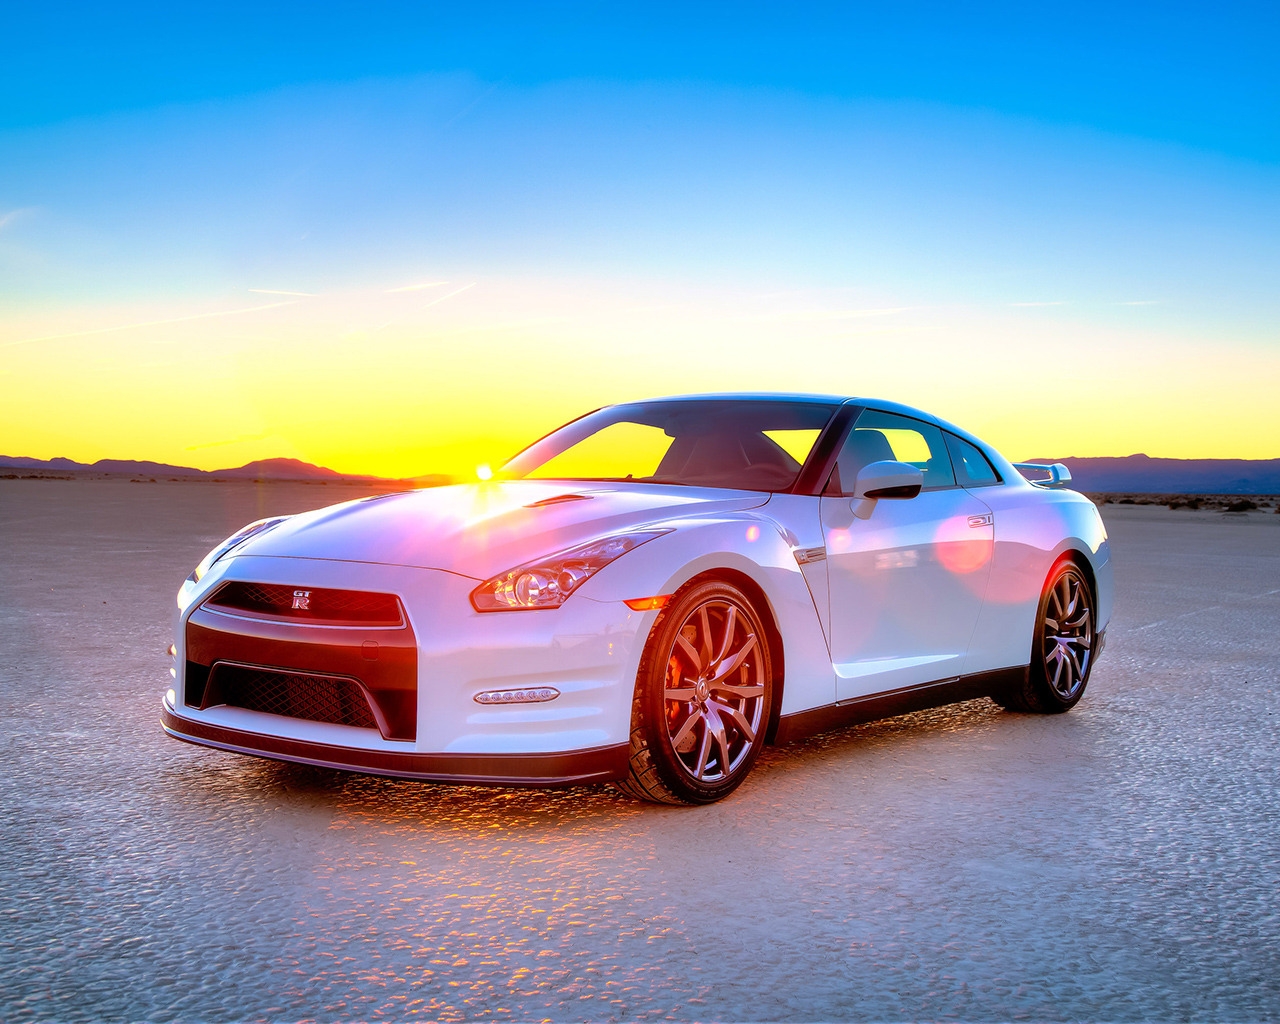 White Nissan GT-R 2014 Edition for 1280 x 1024 resolution